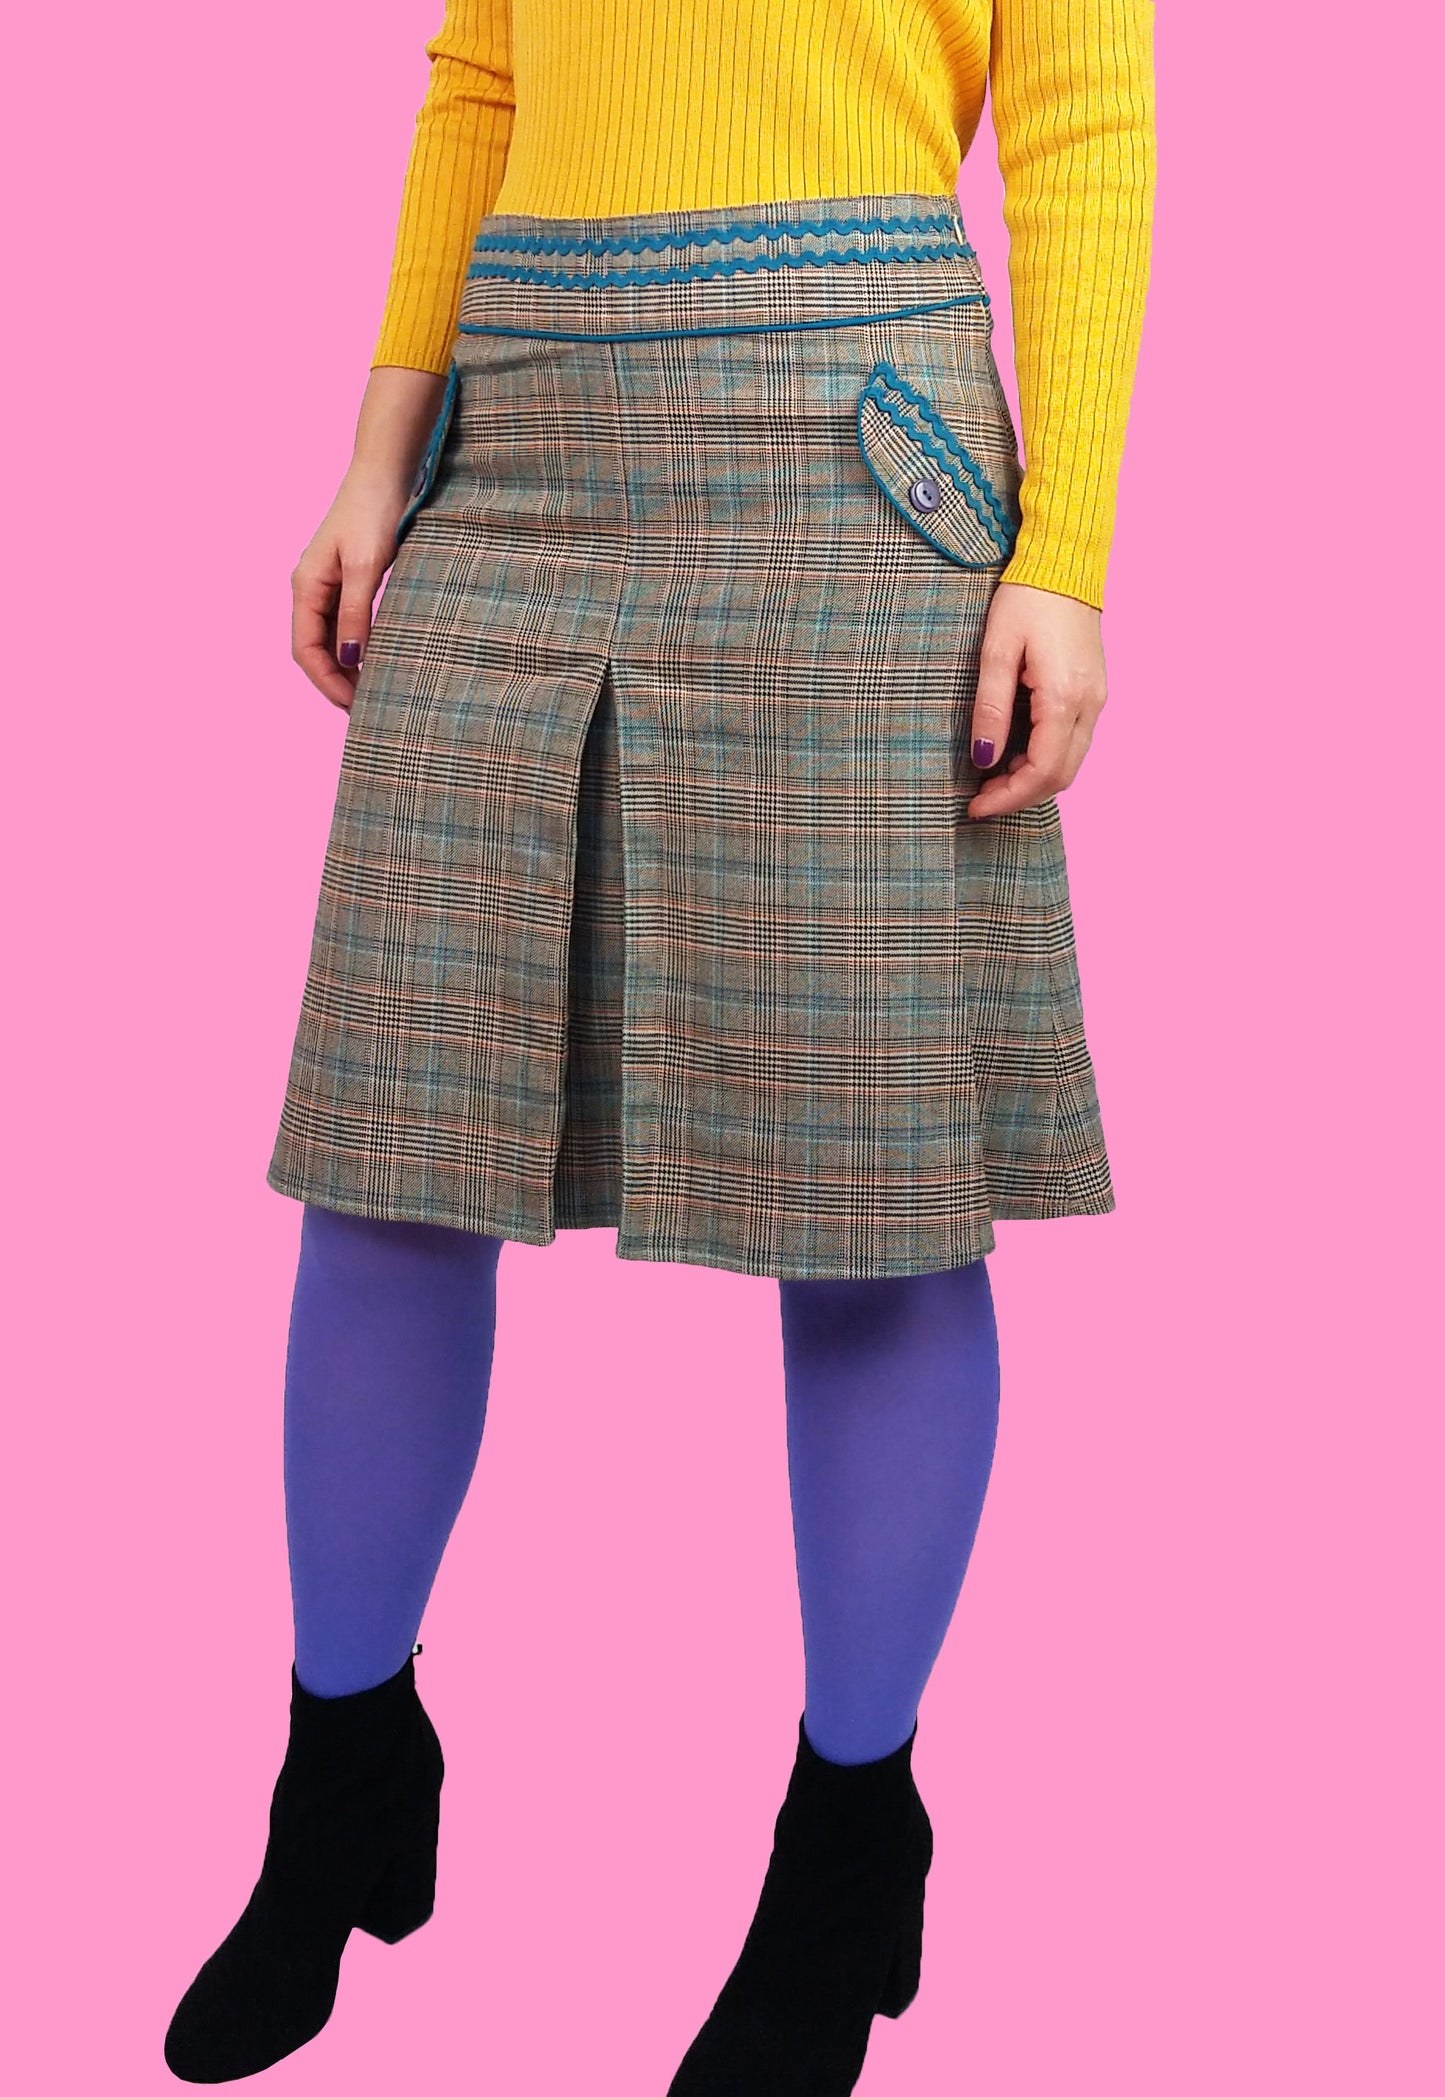 90's A-line Skirt - size S-M